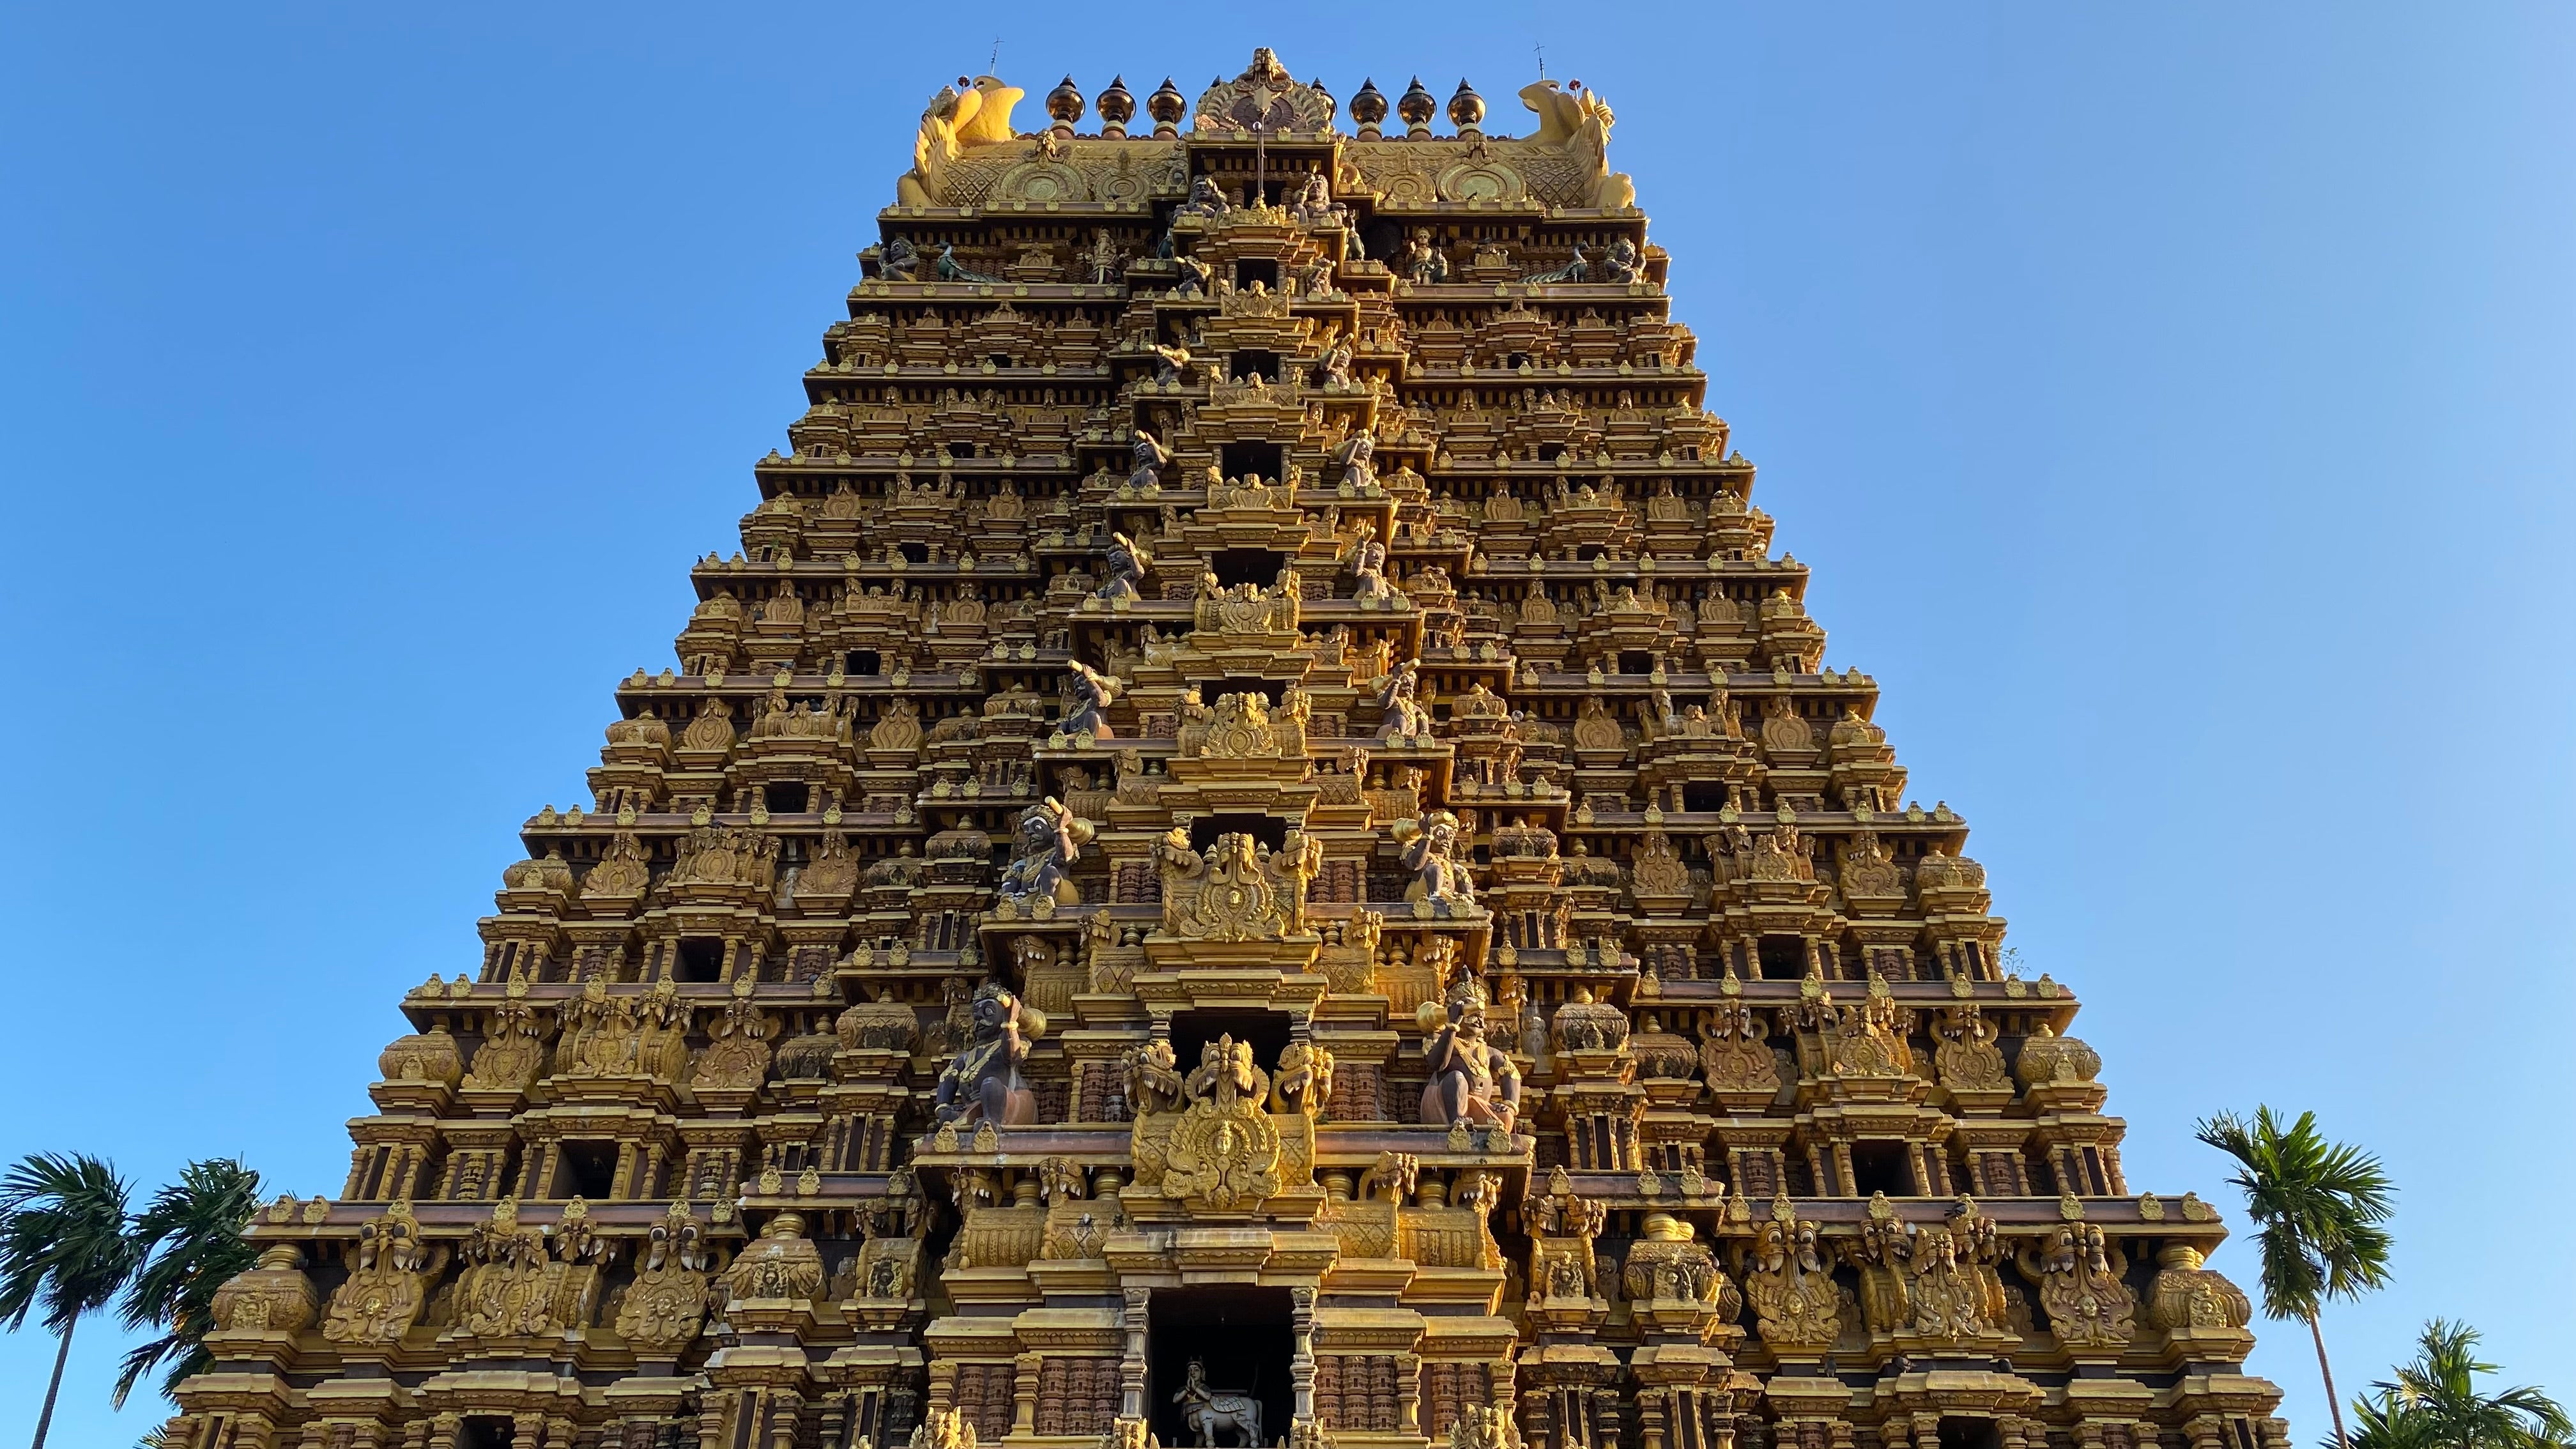 The tower of Nallur Kandaswamy Kovil, a temple in Jaffna, is ornately carved